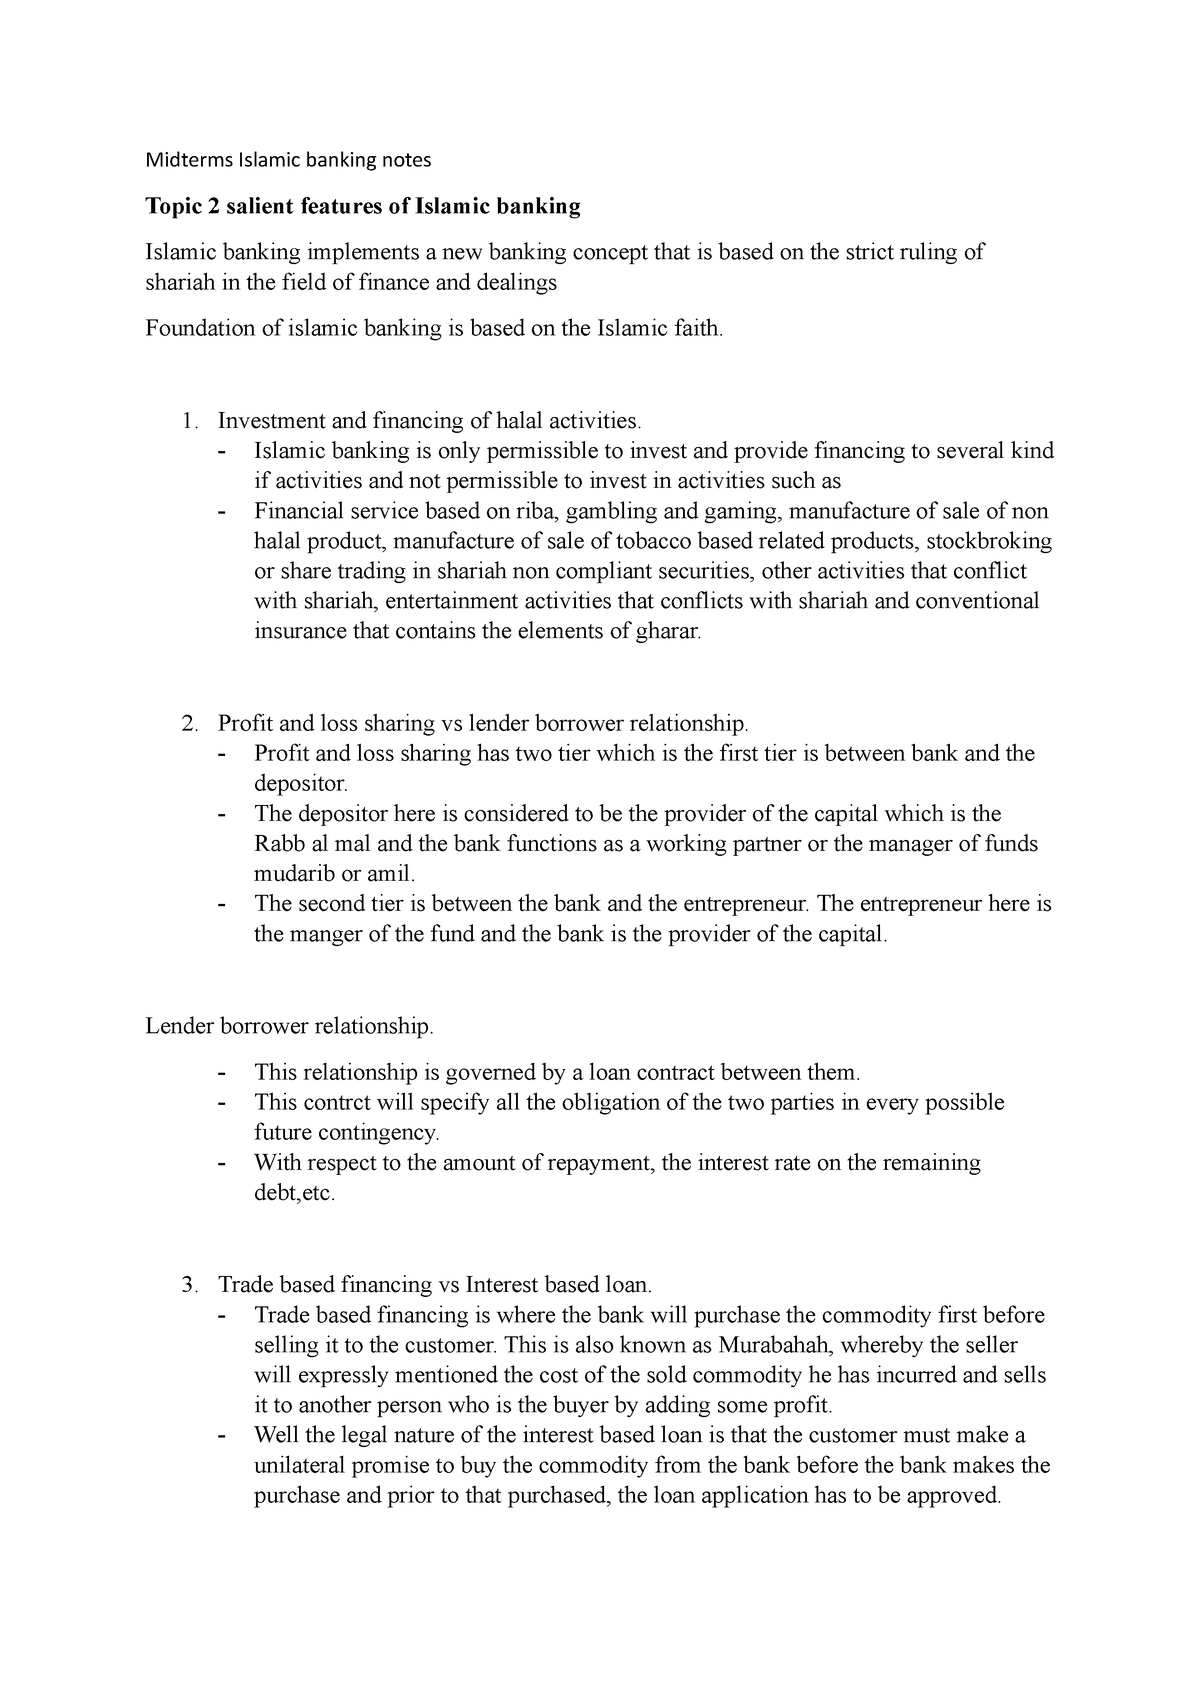 Midterms Islamic banking notes - Investment and financing of halal ...